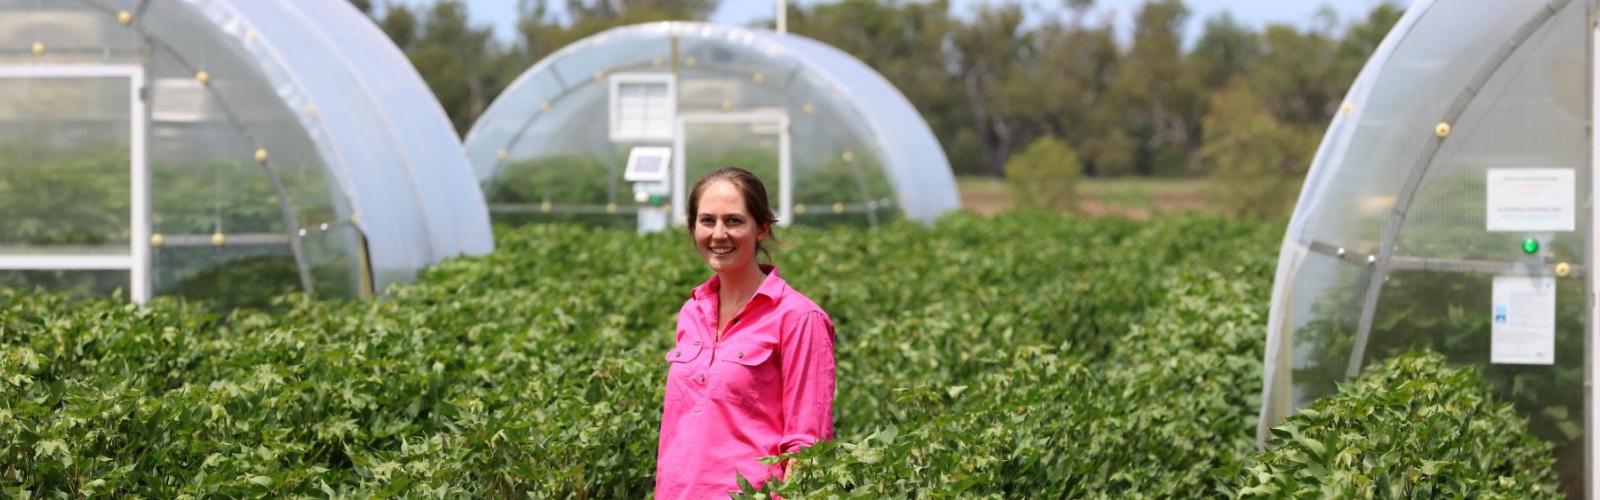 Cotton researcher in a pink shirt standing in a cotton trial paddock, in front of glasshouses.